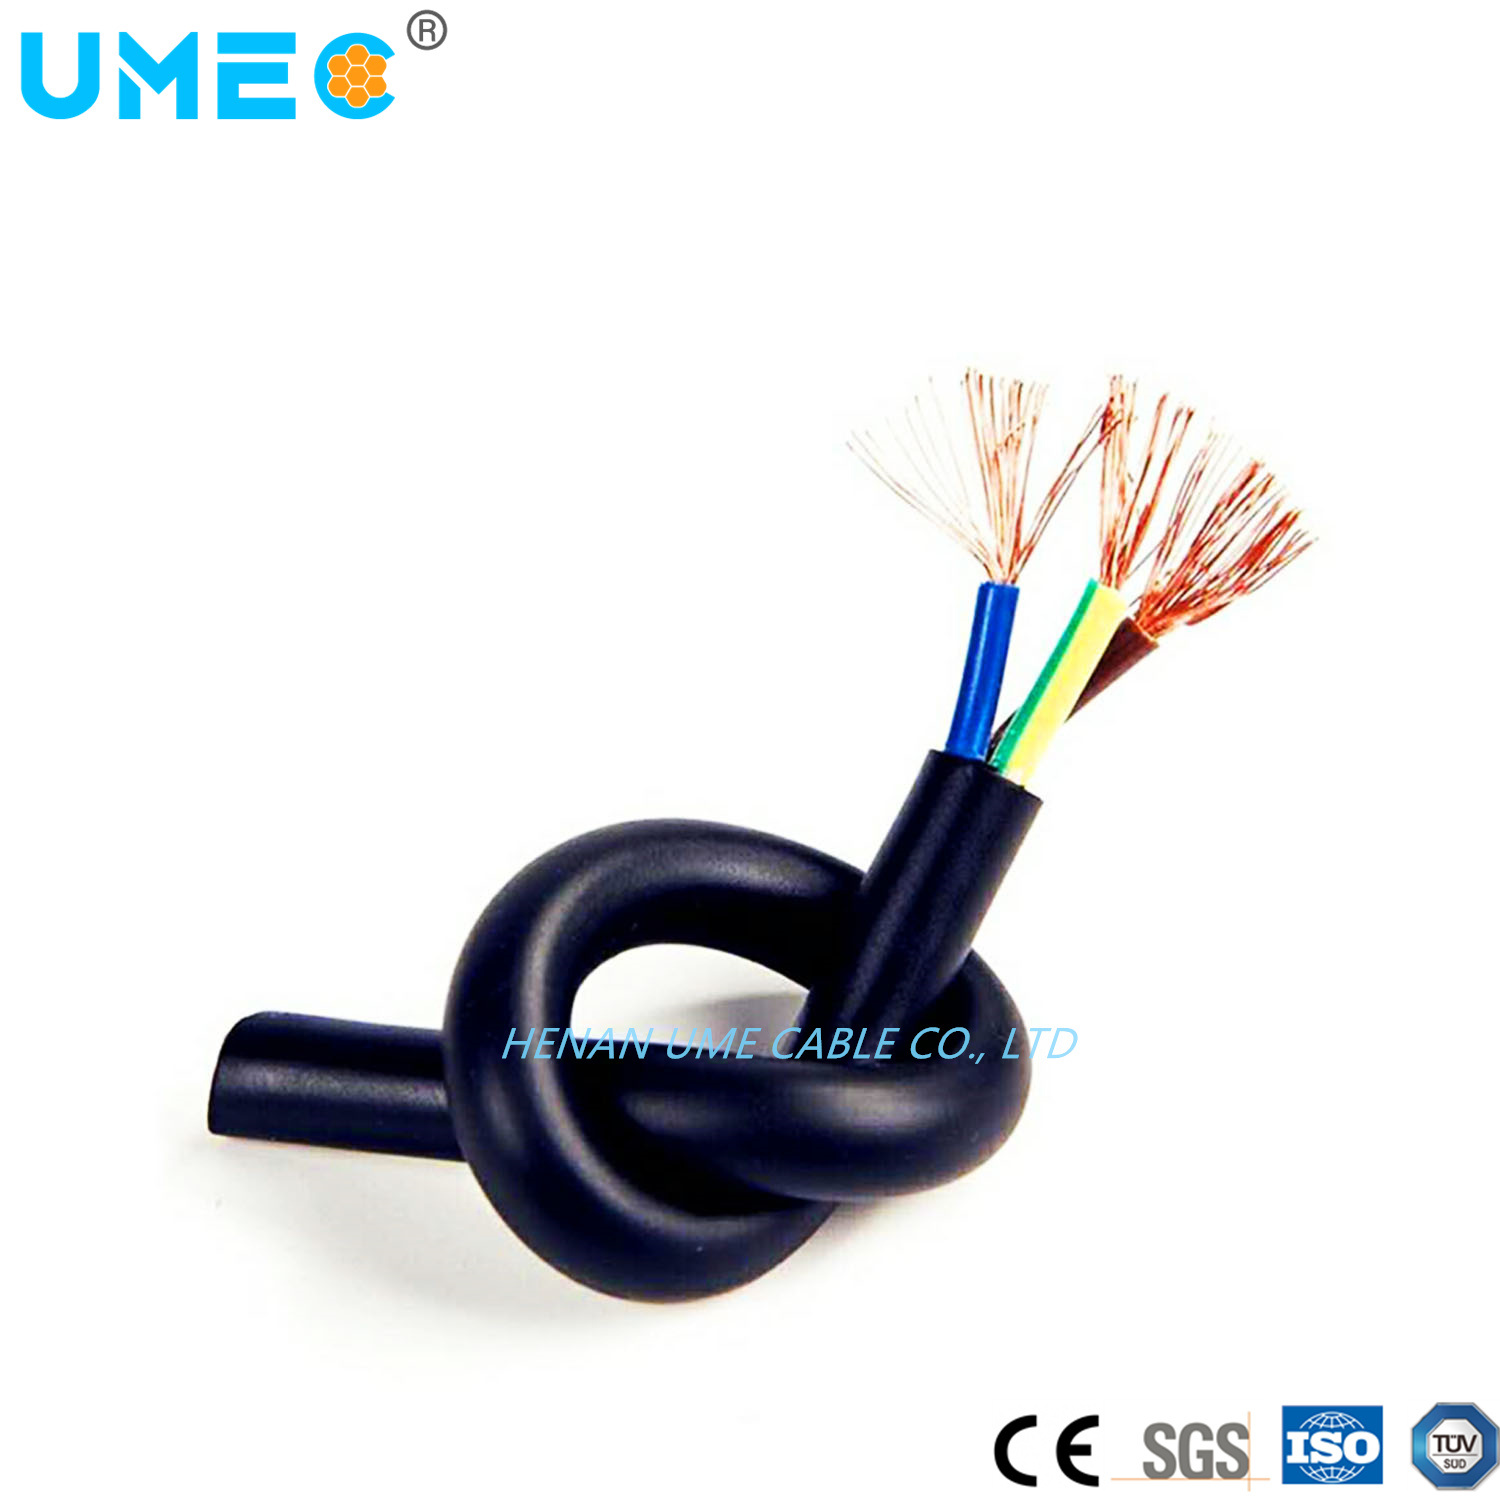 300/500V 450/750V 3G 4G 5gx0.75mm2 1.0mm2 H05rr-F H05rn-F H07rn-F 3X25sqmm Flexible Flat and Round Rubber Cables